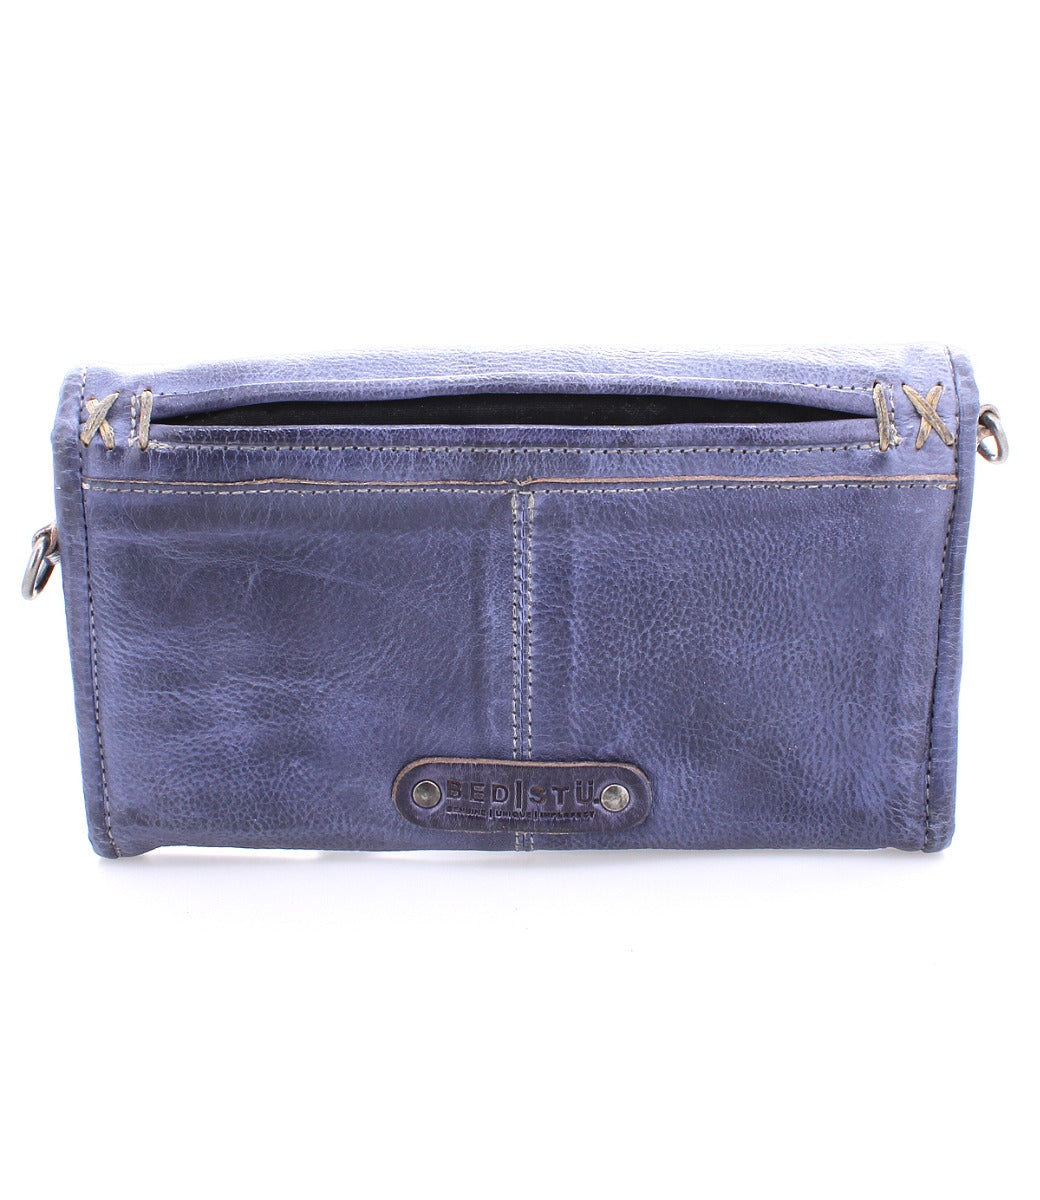 An Amina by Bed Stu blue leather purse with a zipper.